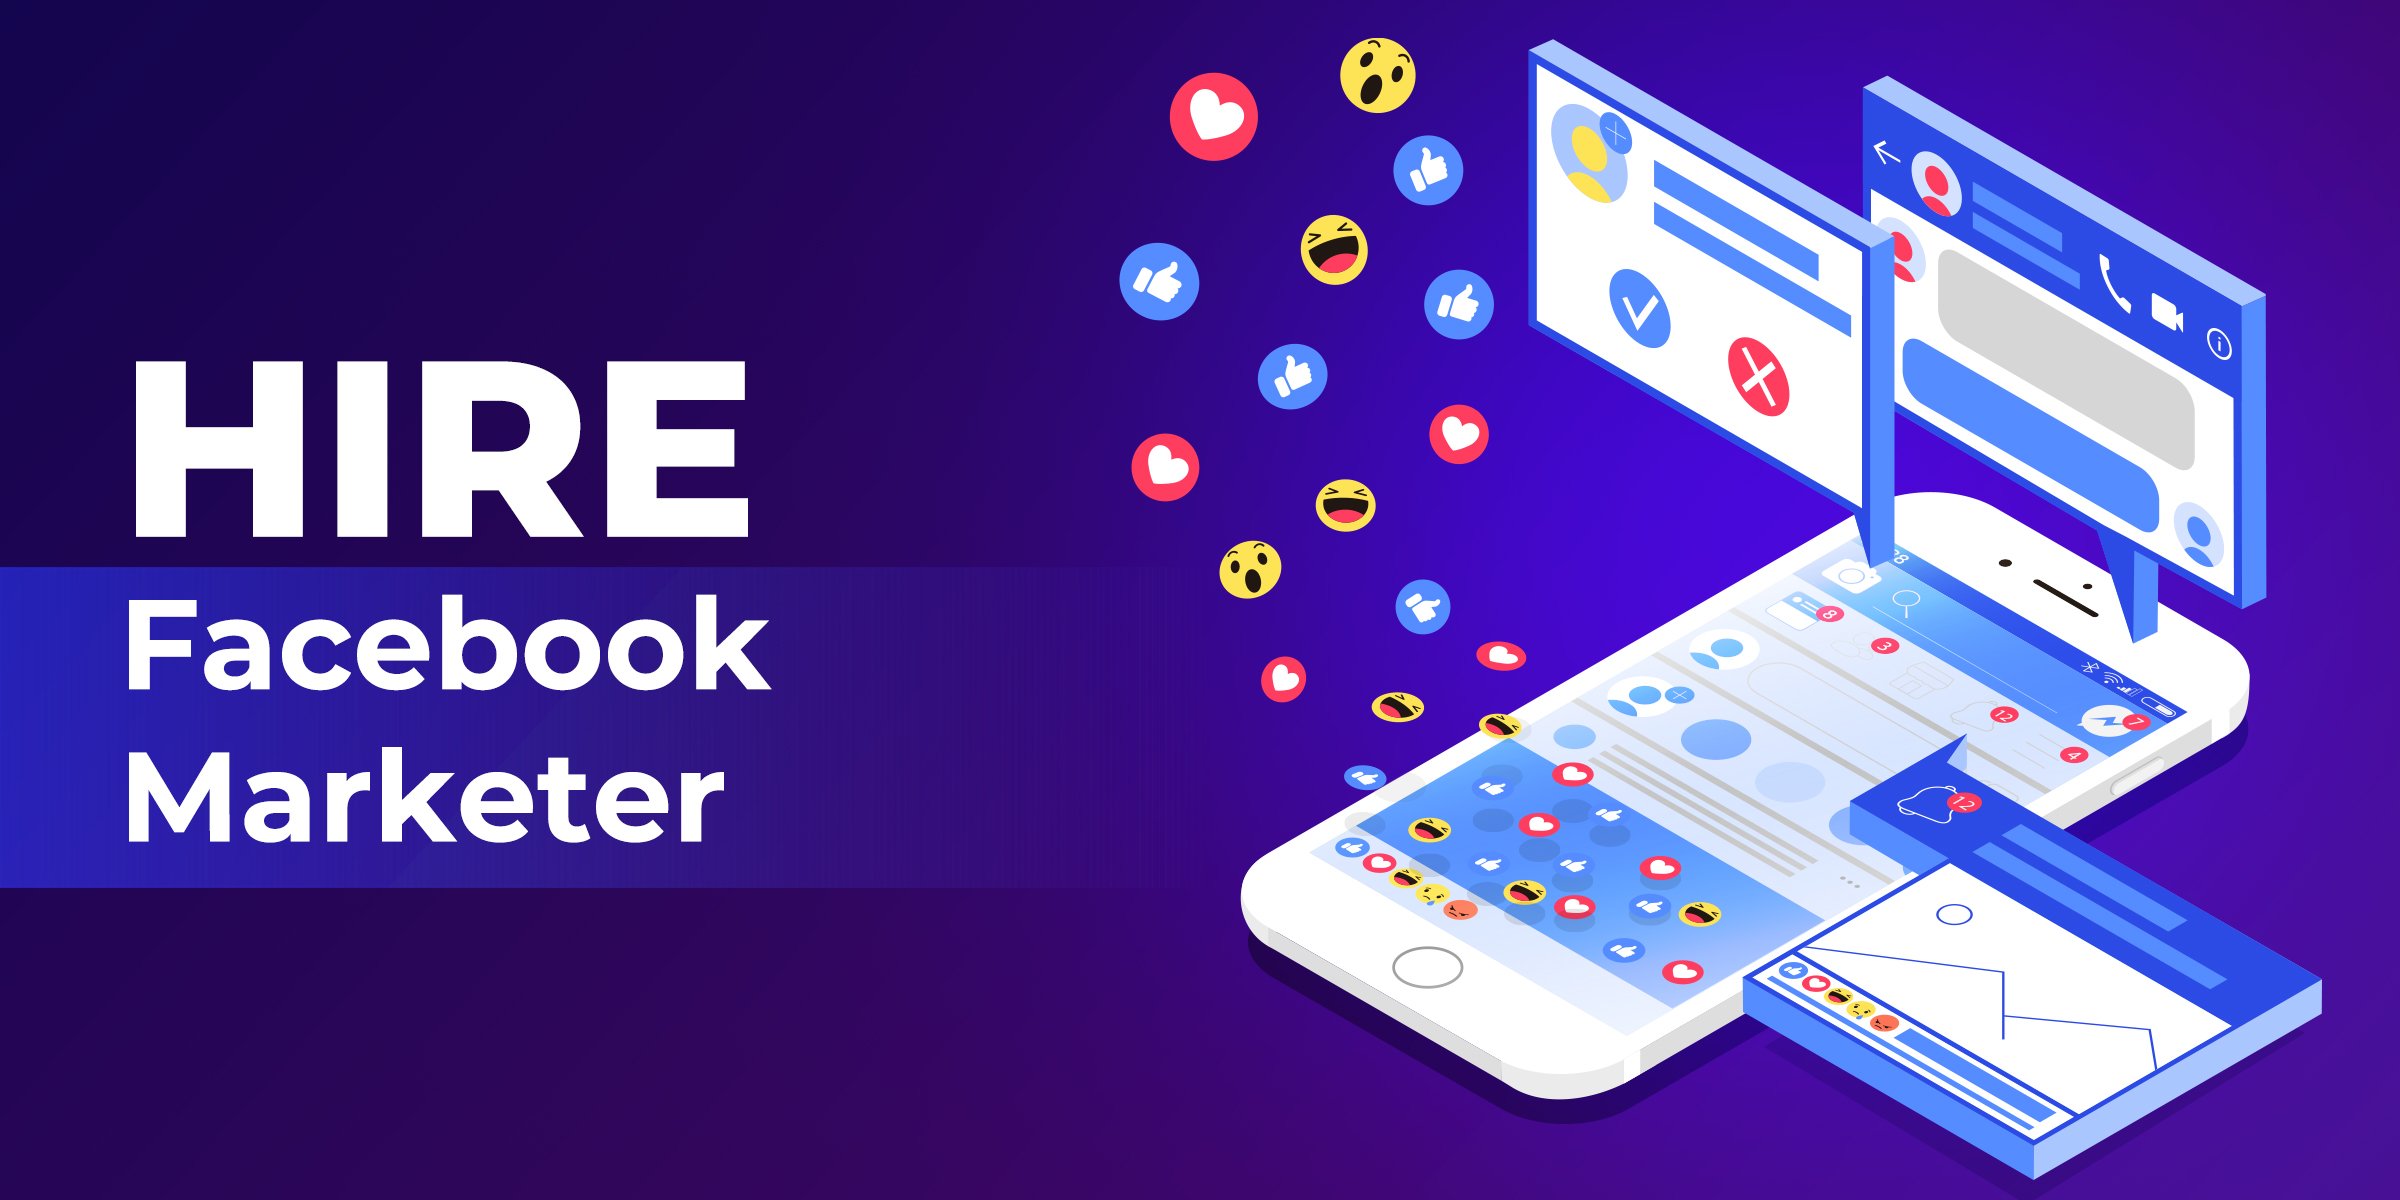 Hire Facebook Marketers